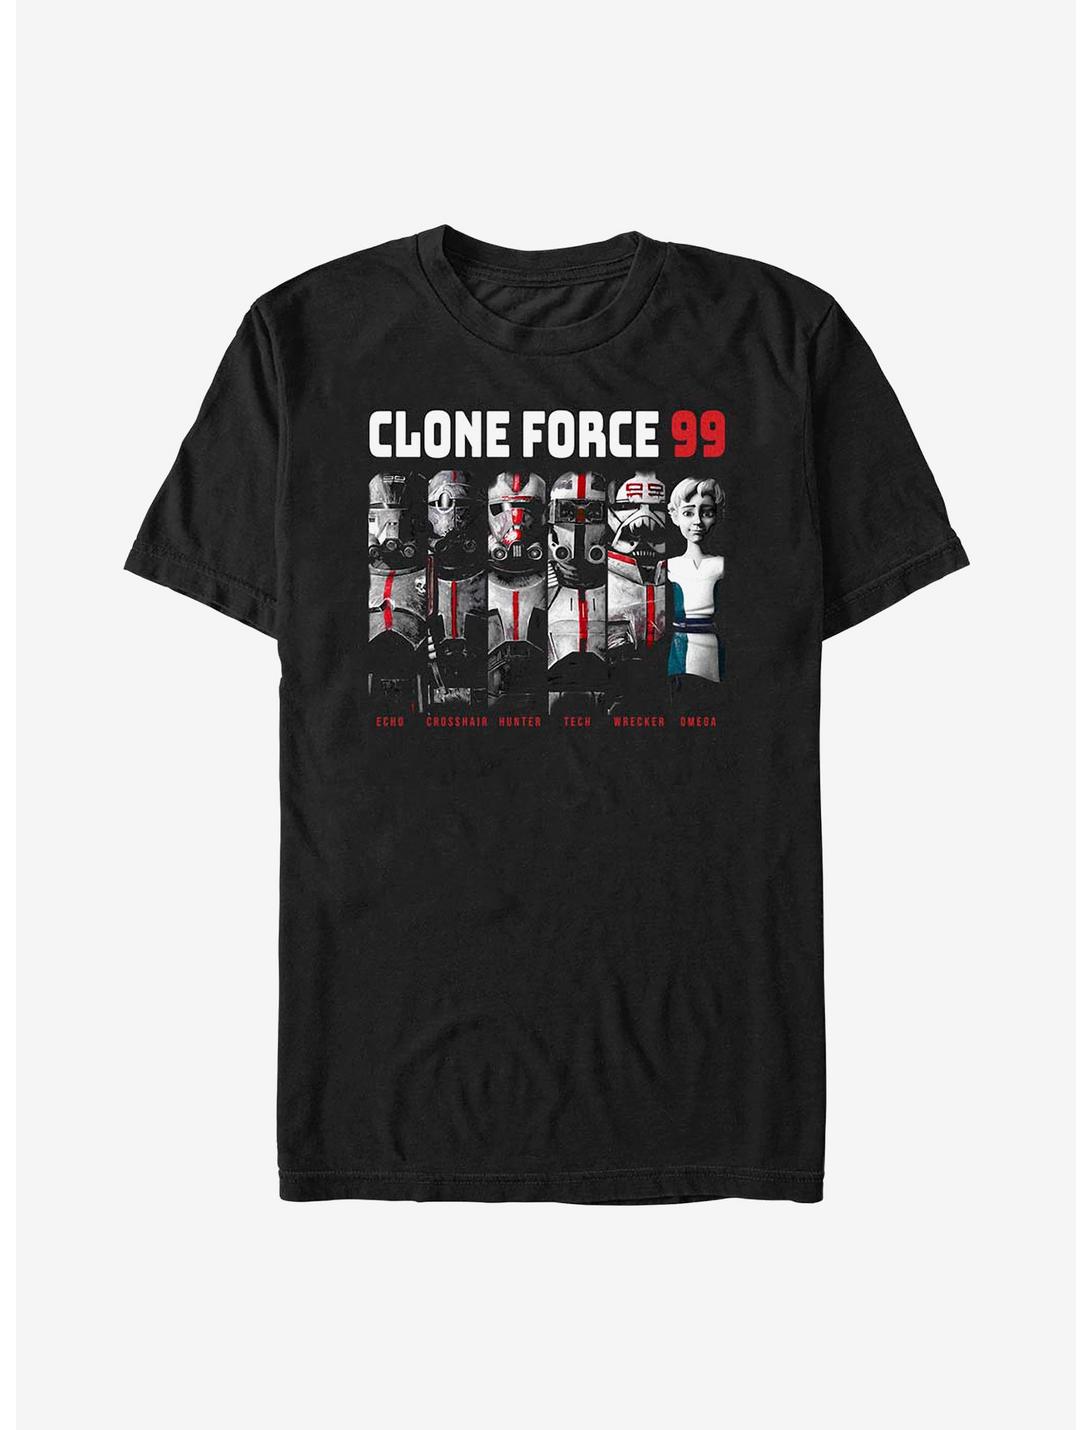 Star Wars: The Bad Batch Clone Force 99 Group T-Shirt Hot Topic Exclusive, BLACK, hi-res